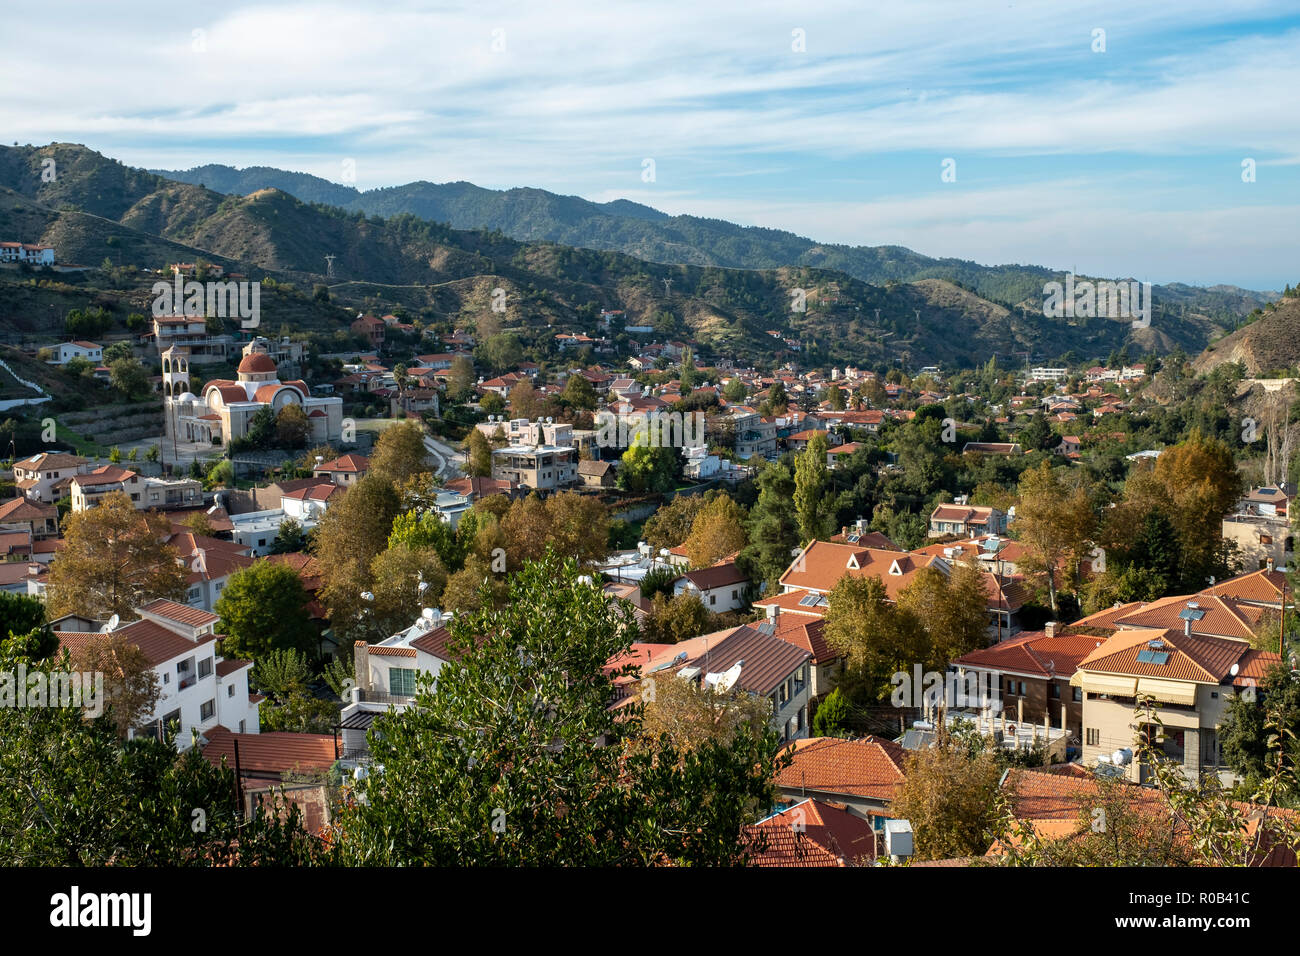 Galata village at the foot of the Troodos mountains, Cyprus. Stock Photo